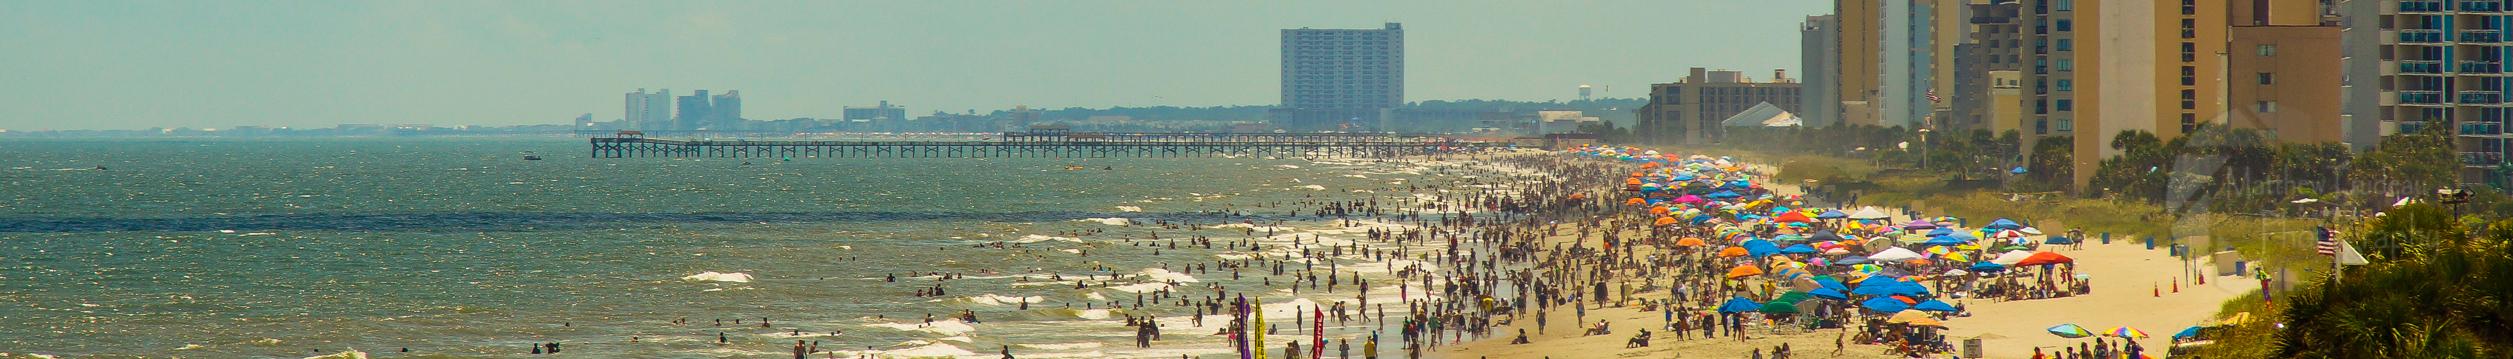 Banner image for Myrtle Beach on GigsGuide